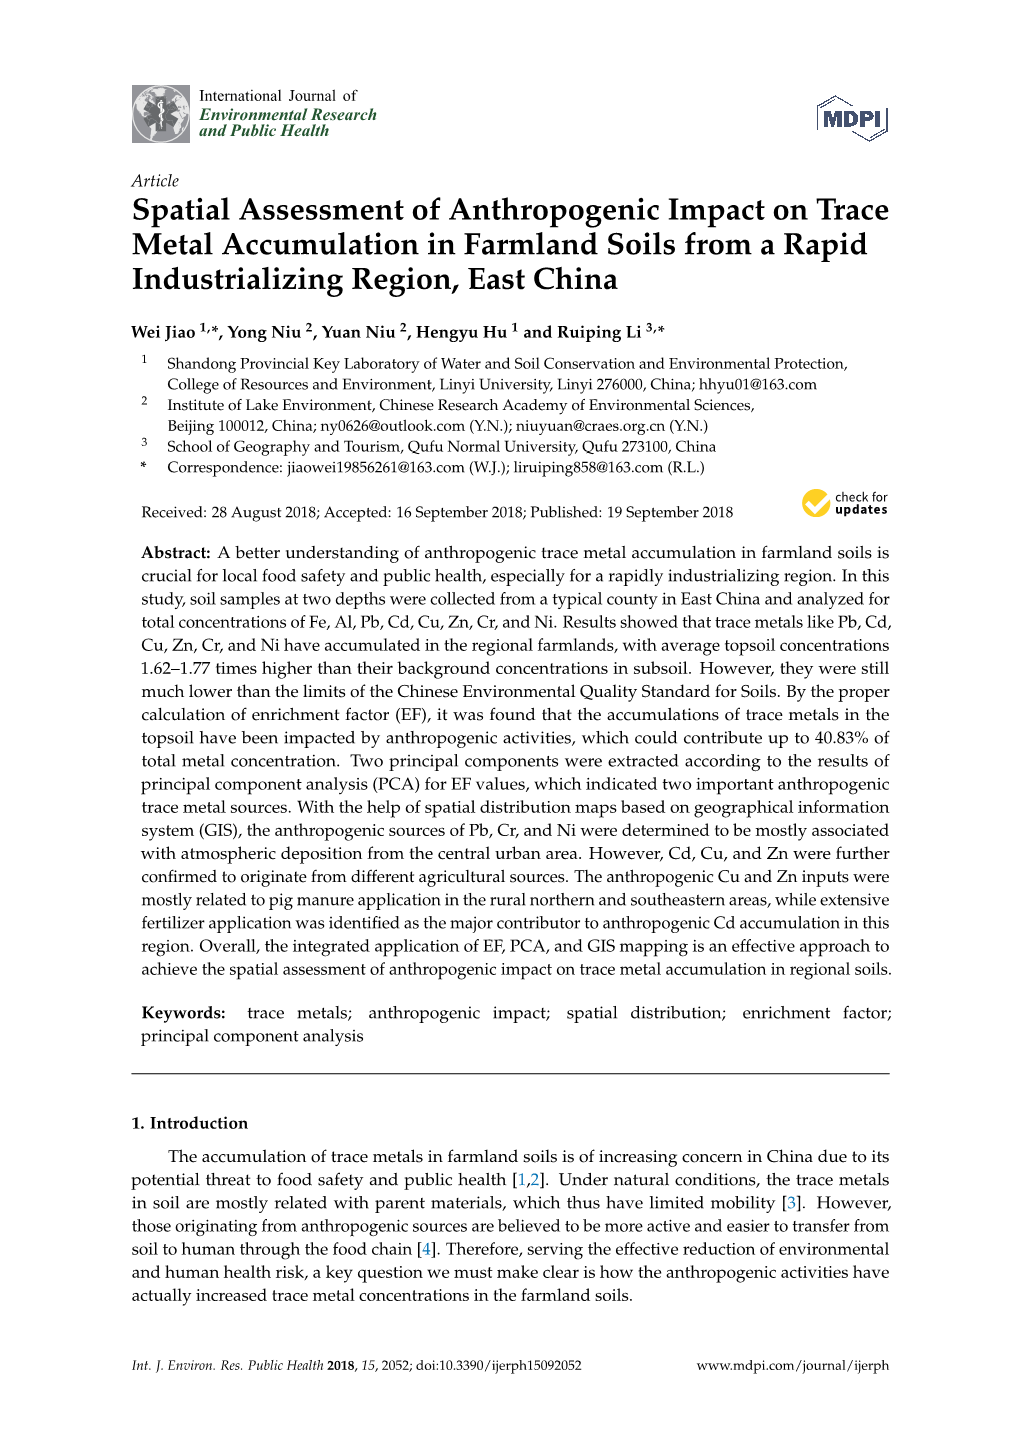 Spatial Assessment of Anthropogenic Impact on Trace Metal Accumulation in Farmland Soils from a Rapid Industrializing Region, East China